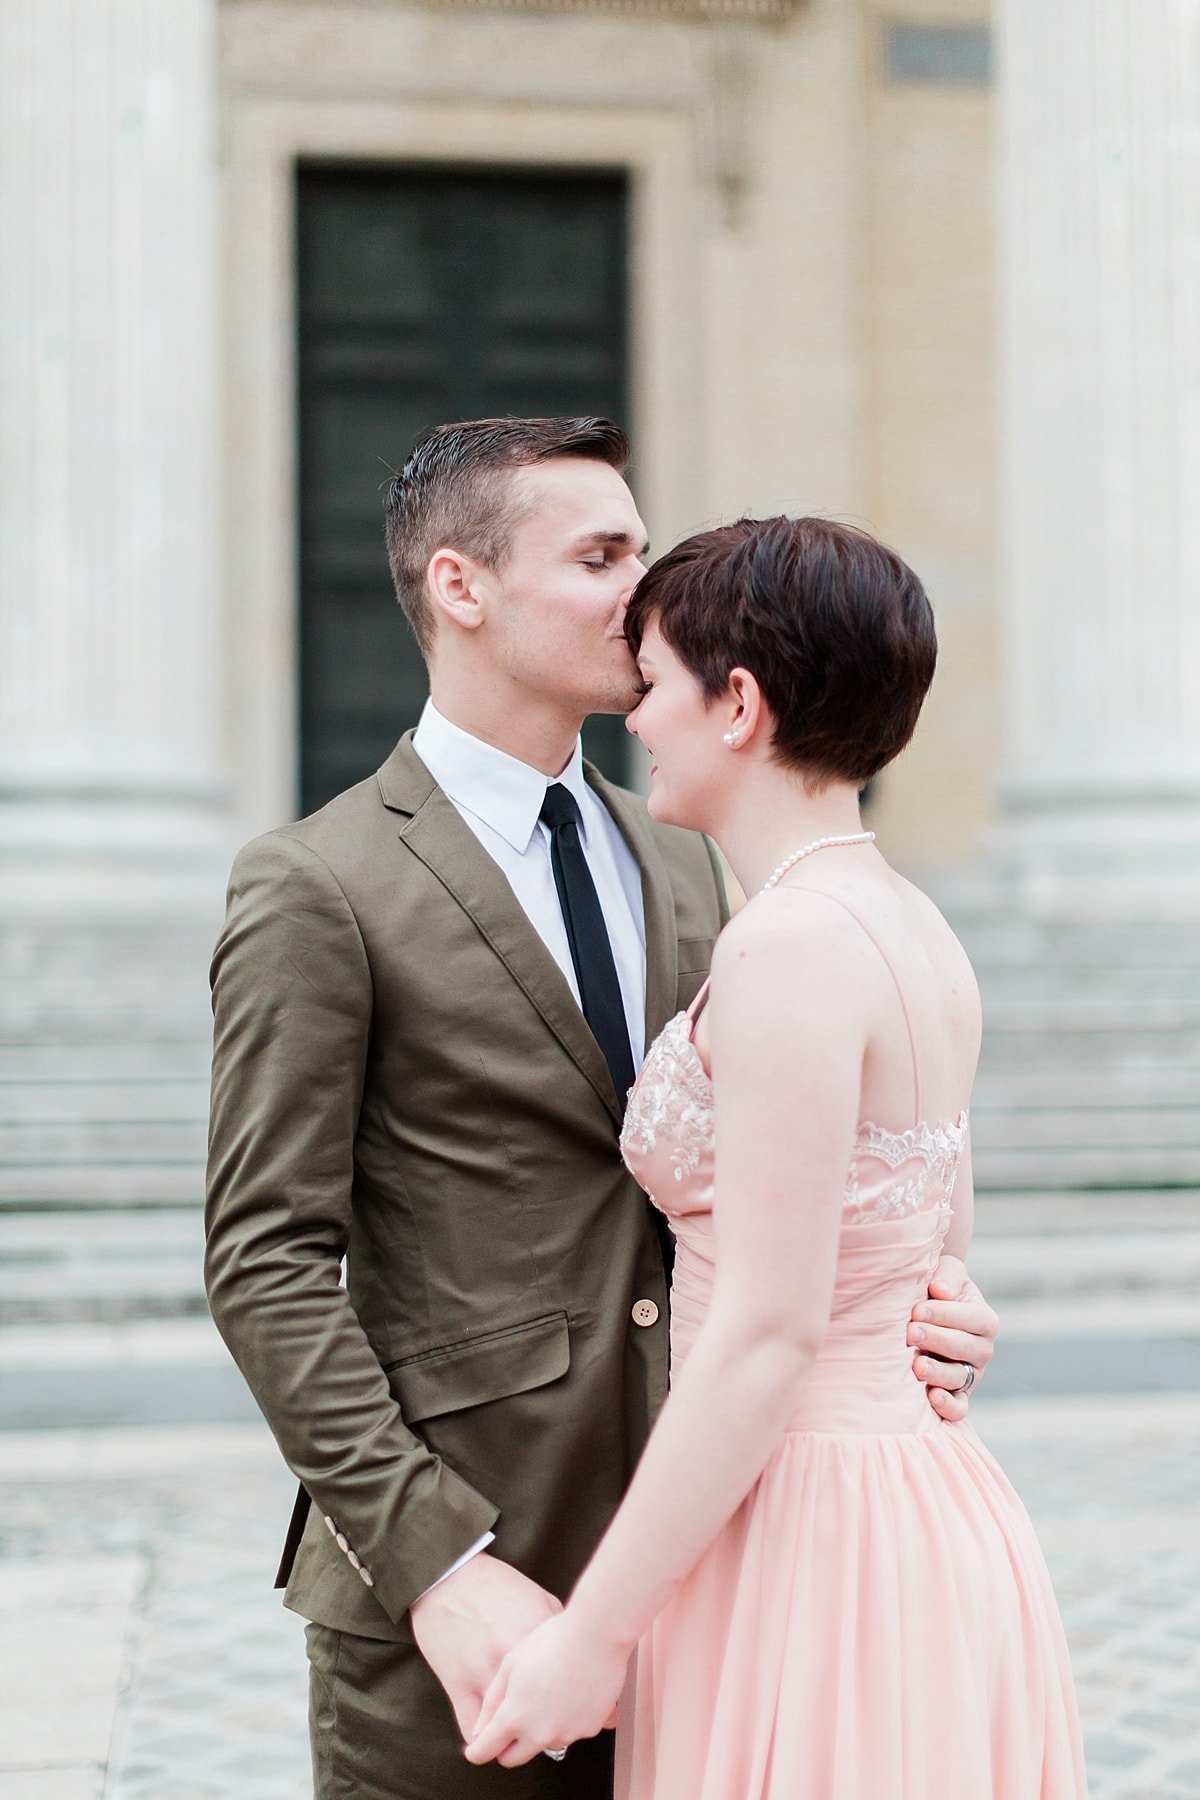 Fall Paris anniversary session at the Pantheon photographed by Alicia Yarrish